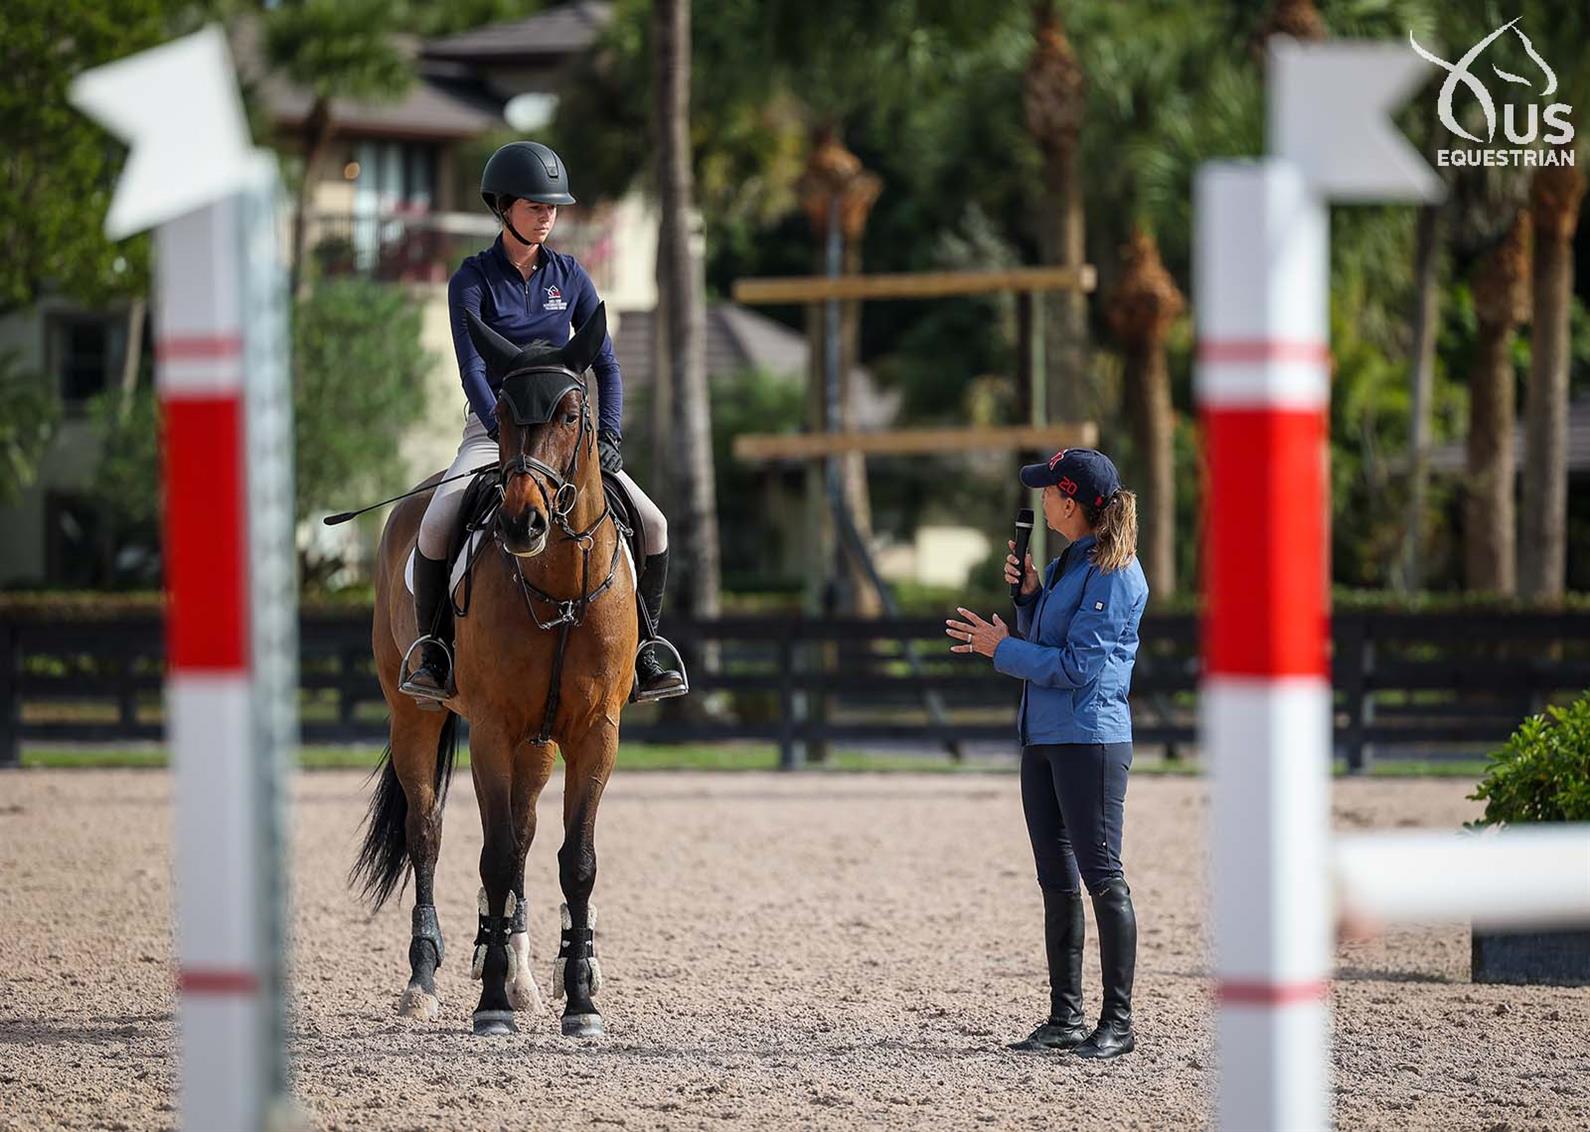 Hannah Koch riding with Laura Kraut at the 2022 USEF Horsemastership Training session in Wellington, Fla.